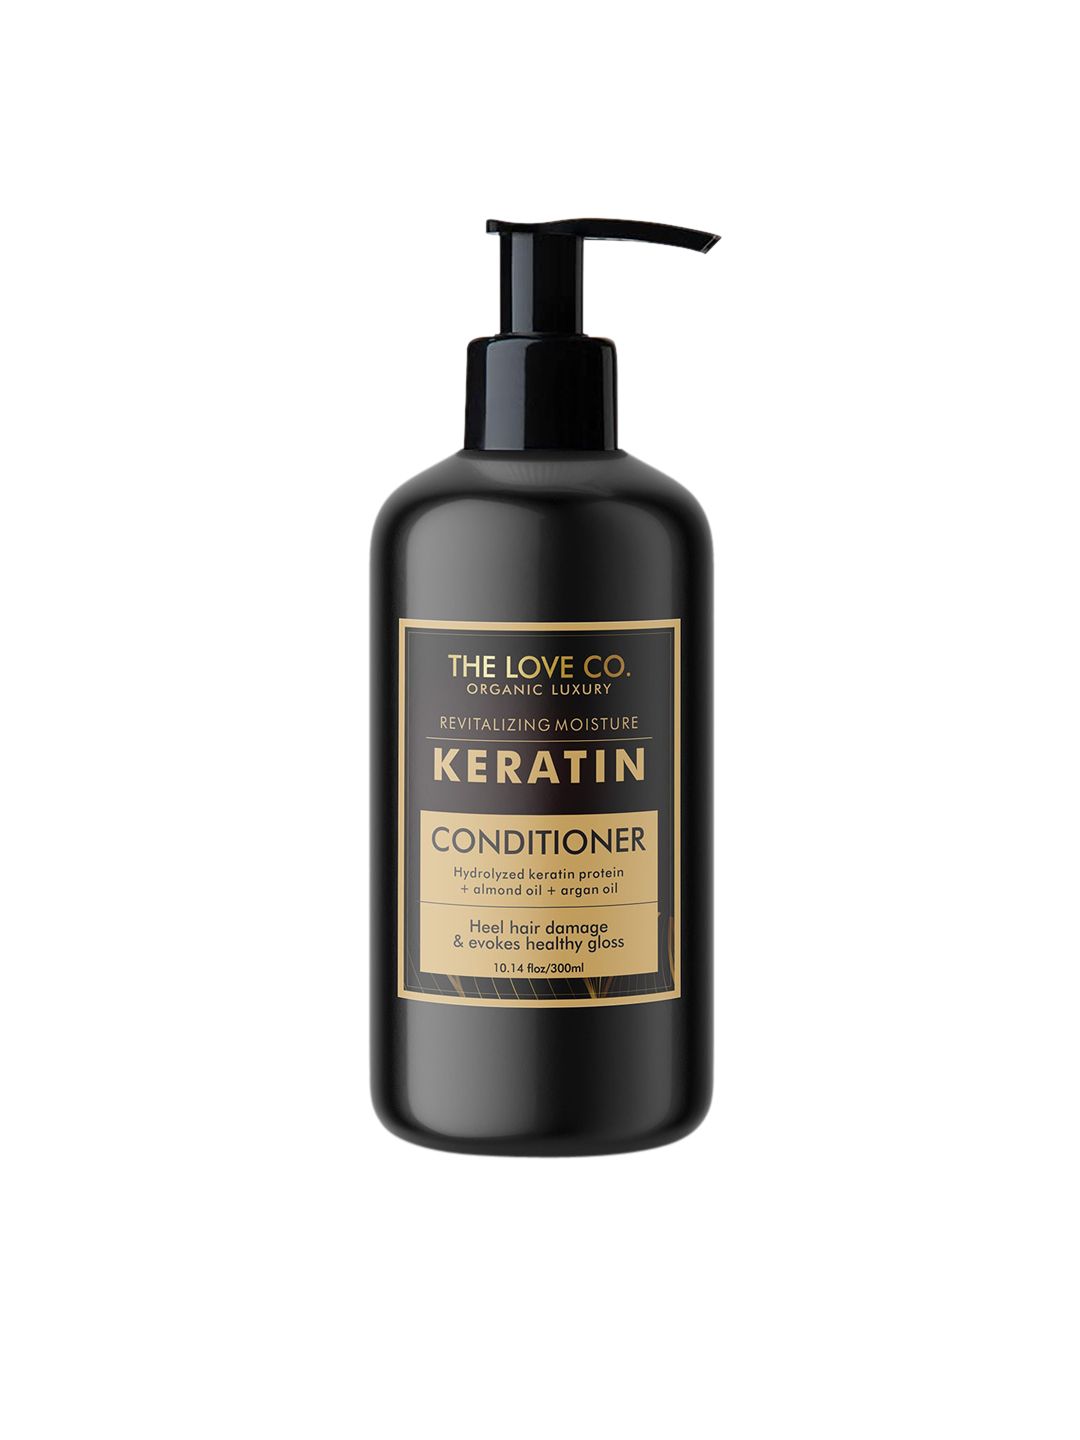 THE LOVE CO. Keratin Hair Conditioner with Almond & Argan Oil Extracts - 300ml Price in India